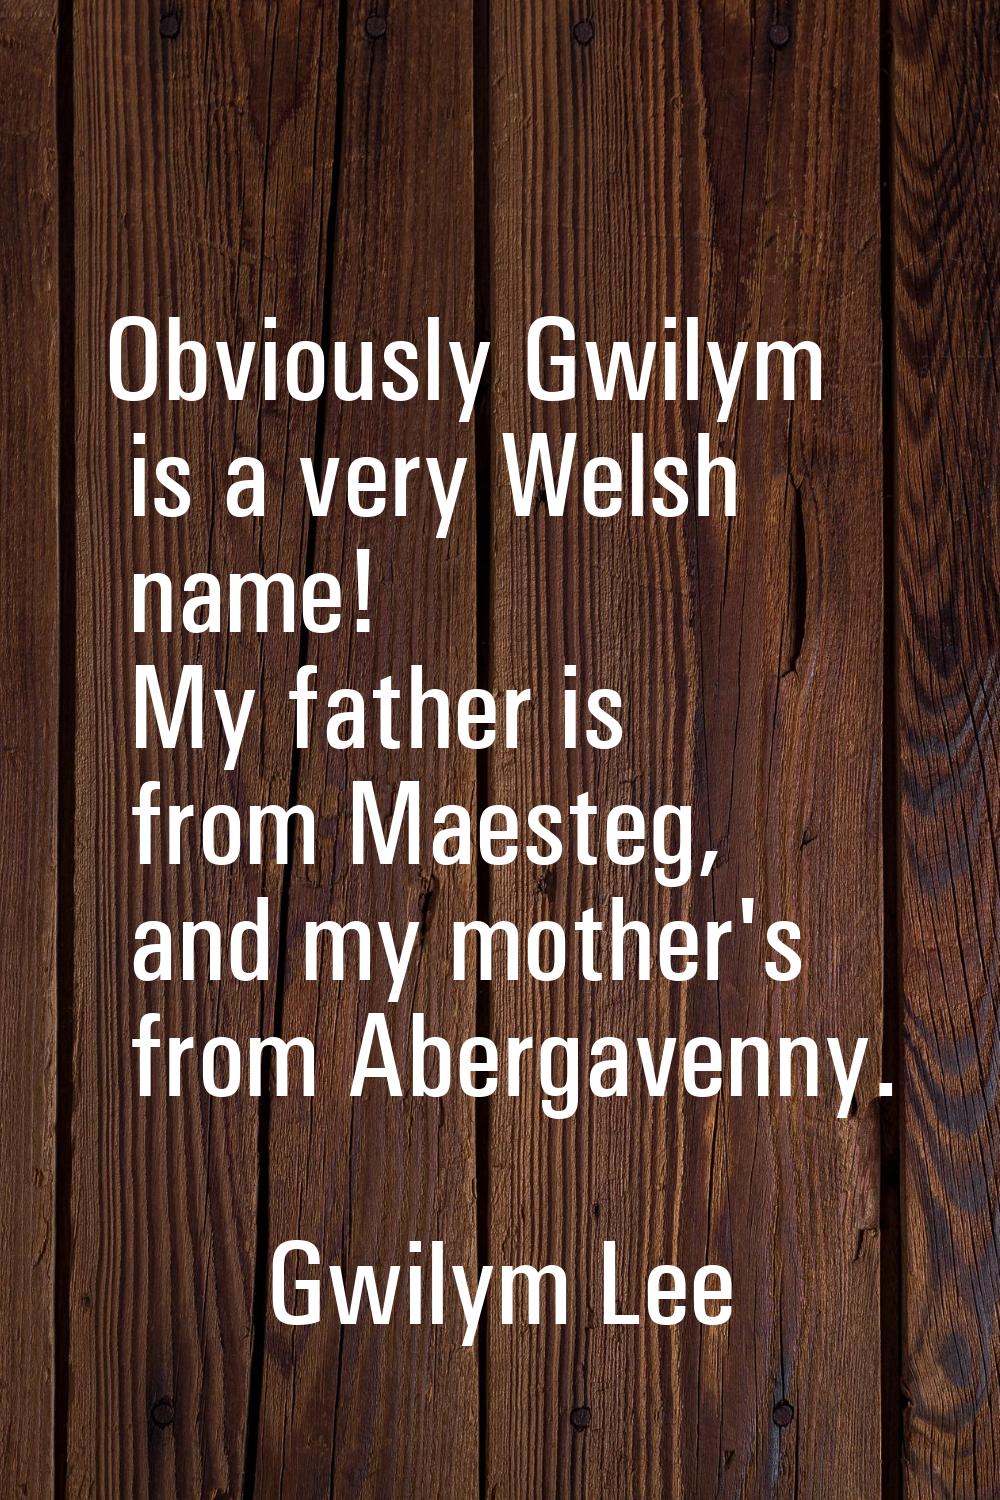 Obviously Gwilym is a very Welsh name! My father is from Maesteg, and my mother's from Abergavenny.